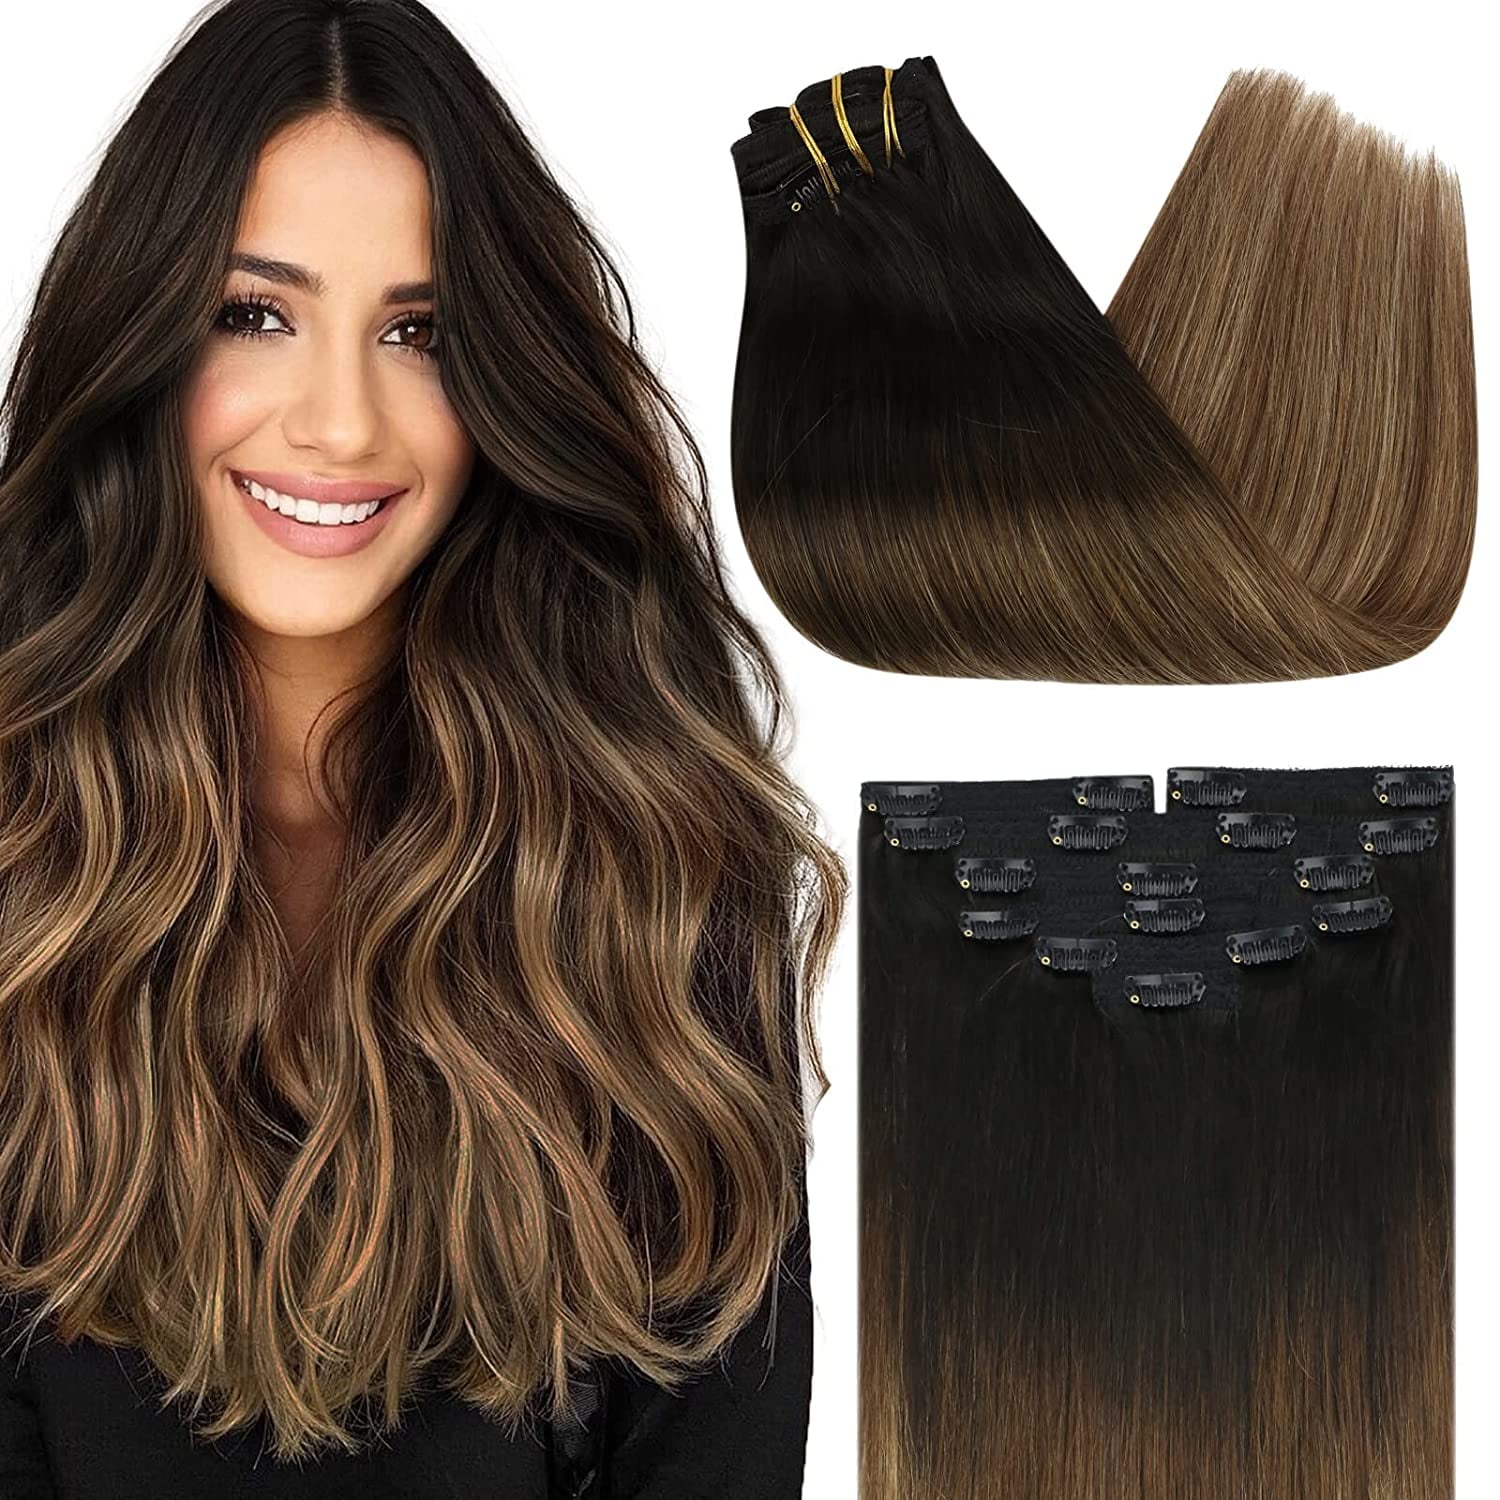 Sunny Clip in Hair Extensions 16 inch Balayage Off Black to Medium Brown  Mix Caramel Blonde Straight Hair 7pcs 120g 